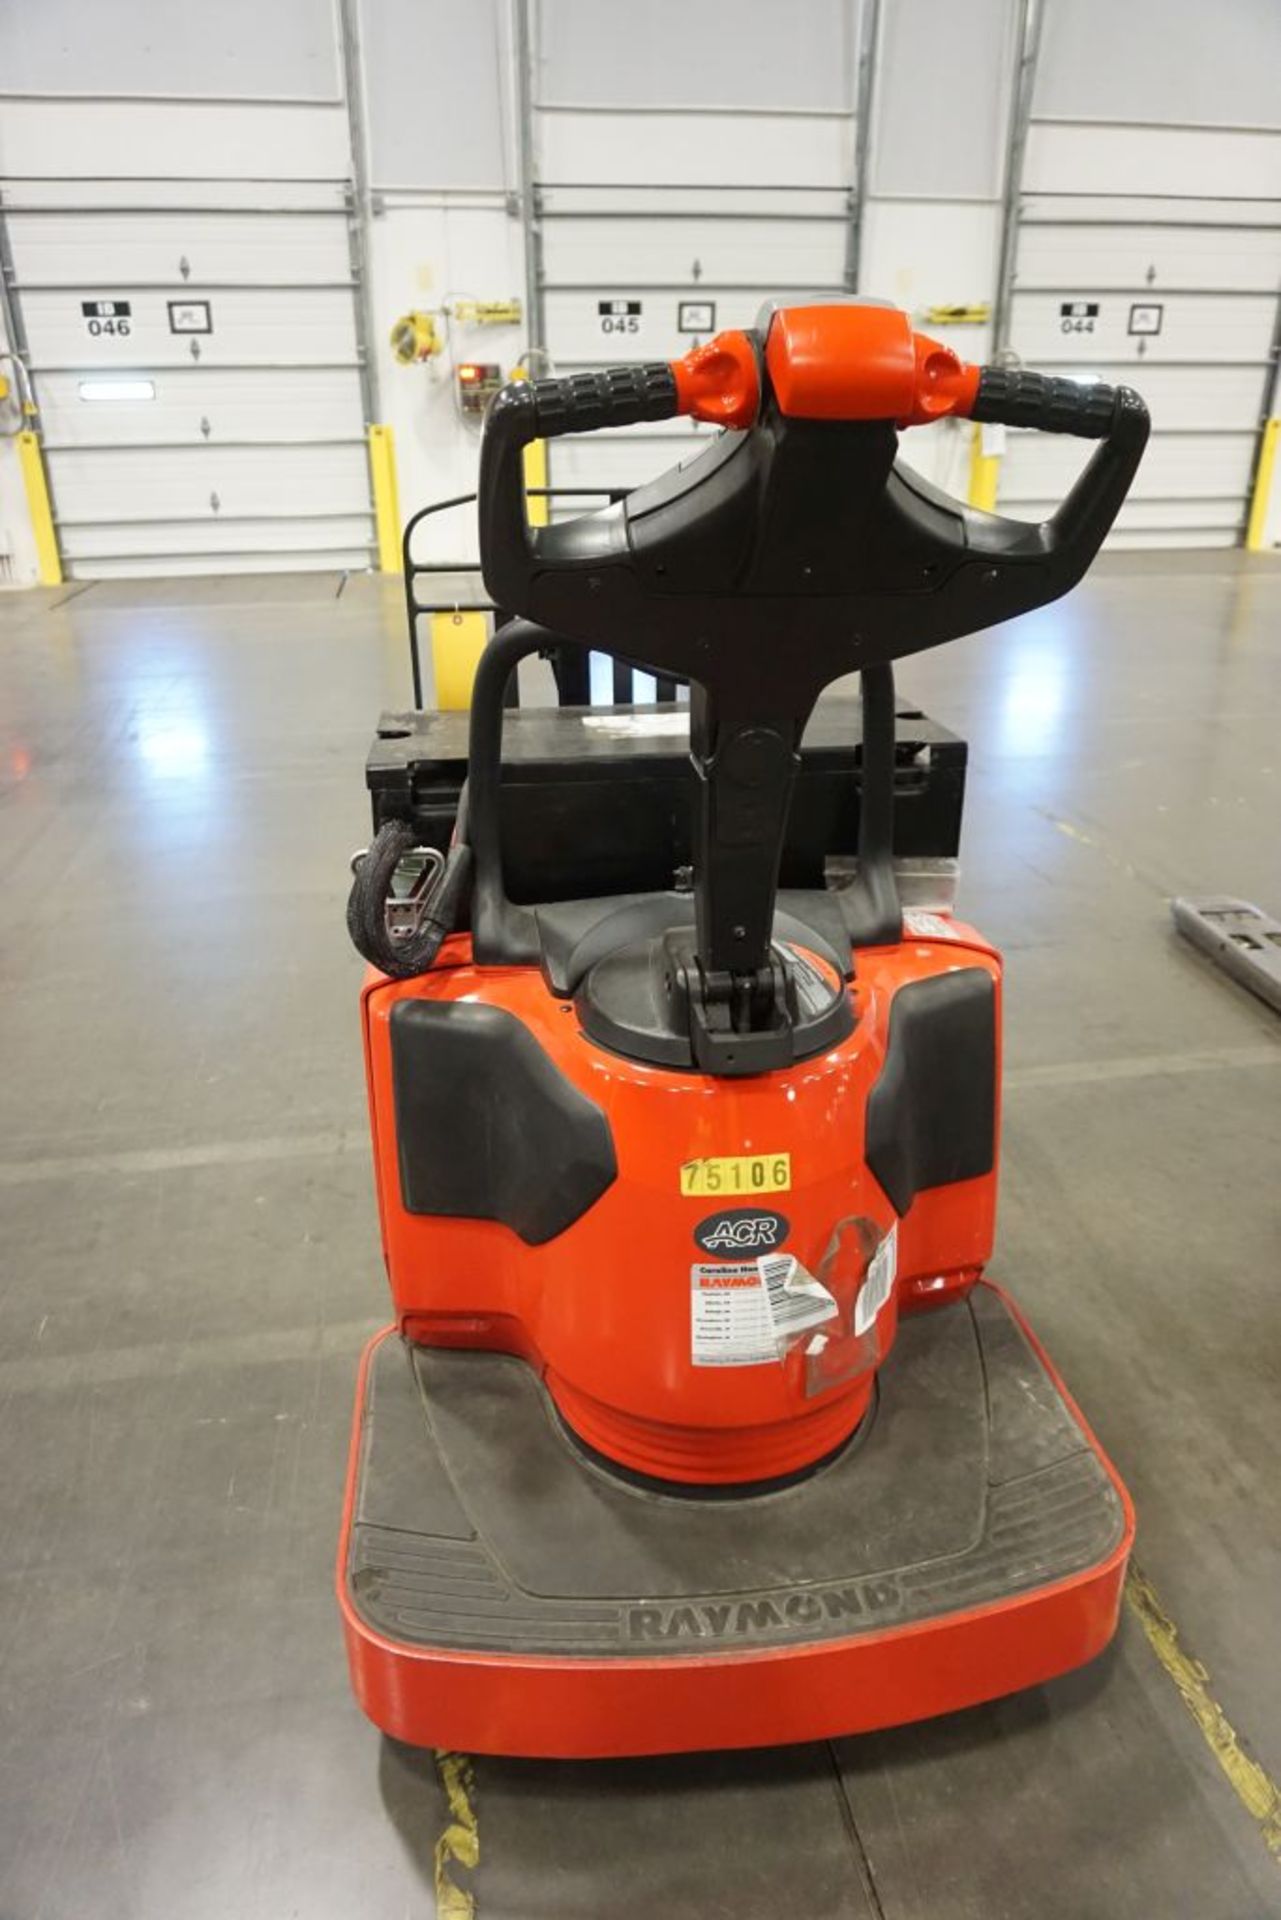 Raymond 8410 Walkie Rider Electric Pallet Truck - Model No. 8410; Serial No. 841-15-27704; 24V; 6, - Image 2 of 8